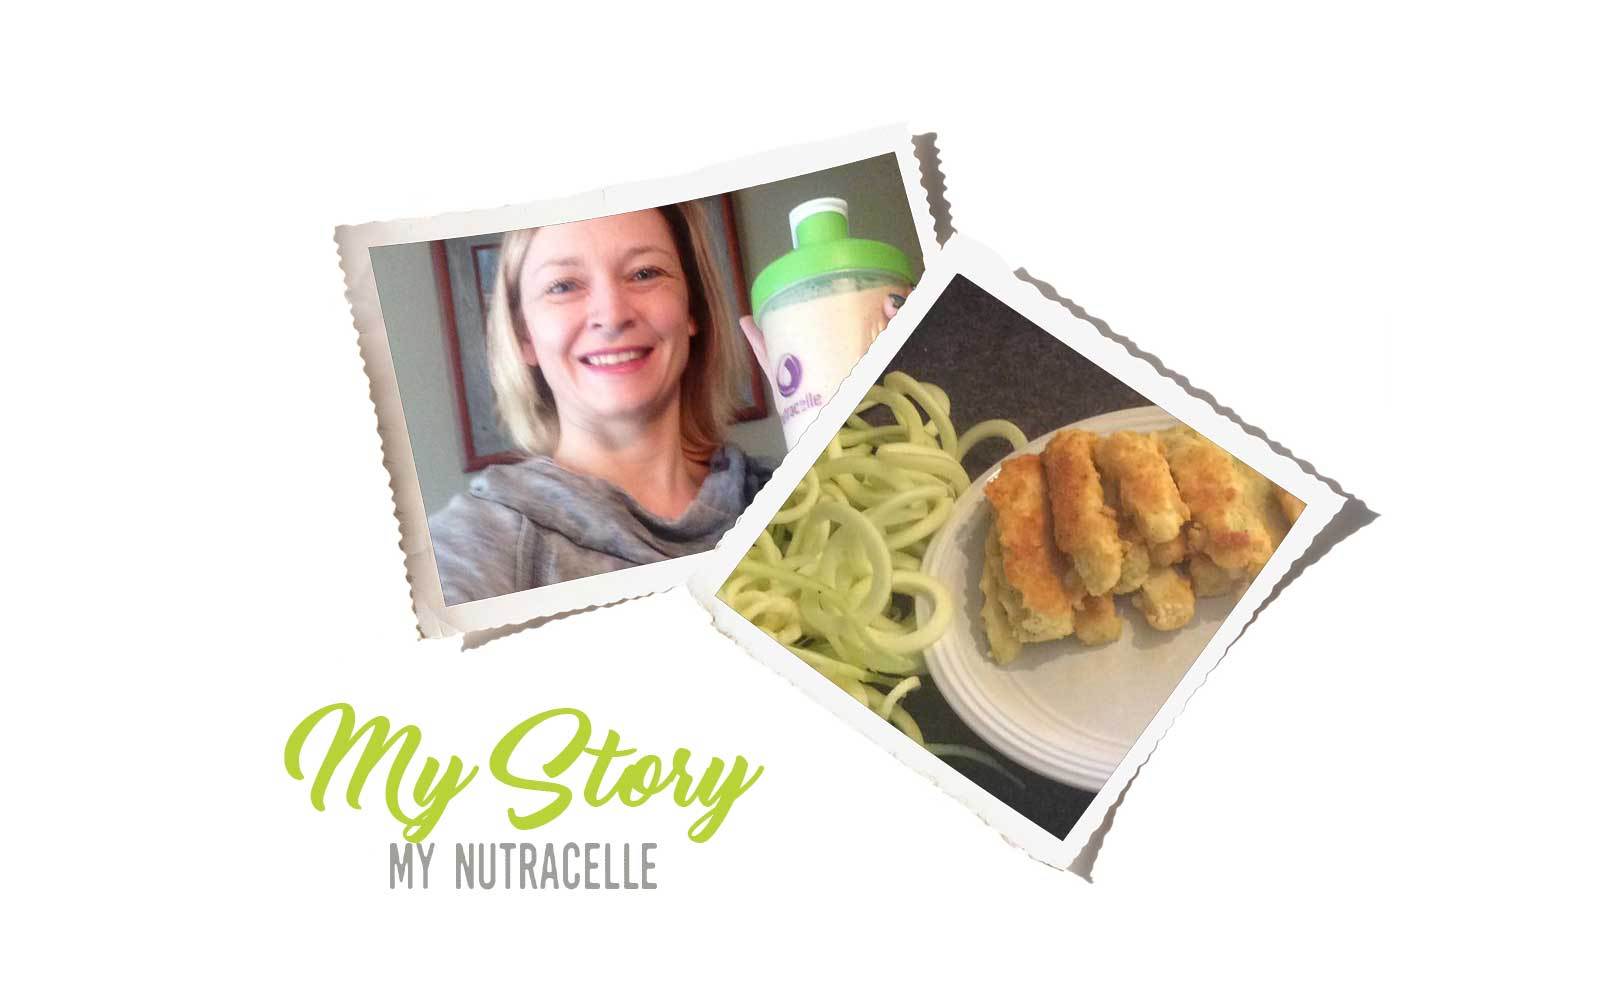 Michelle's Story - Nutracelle